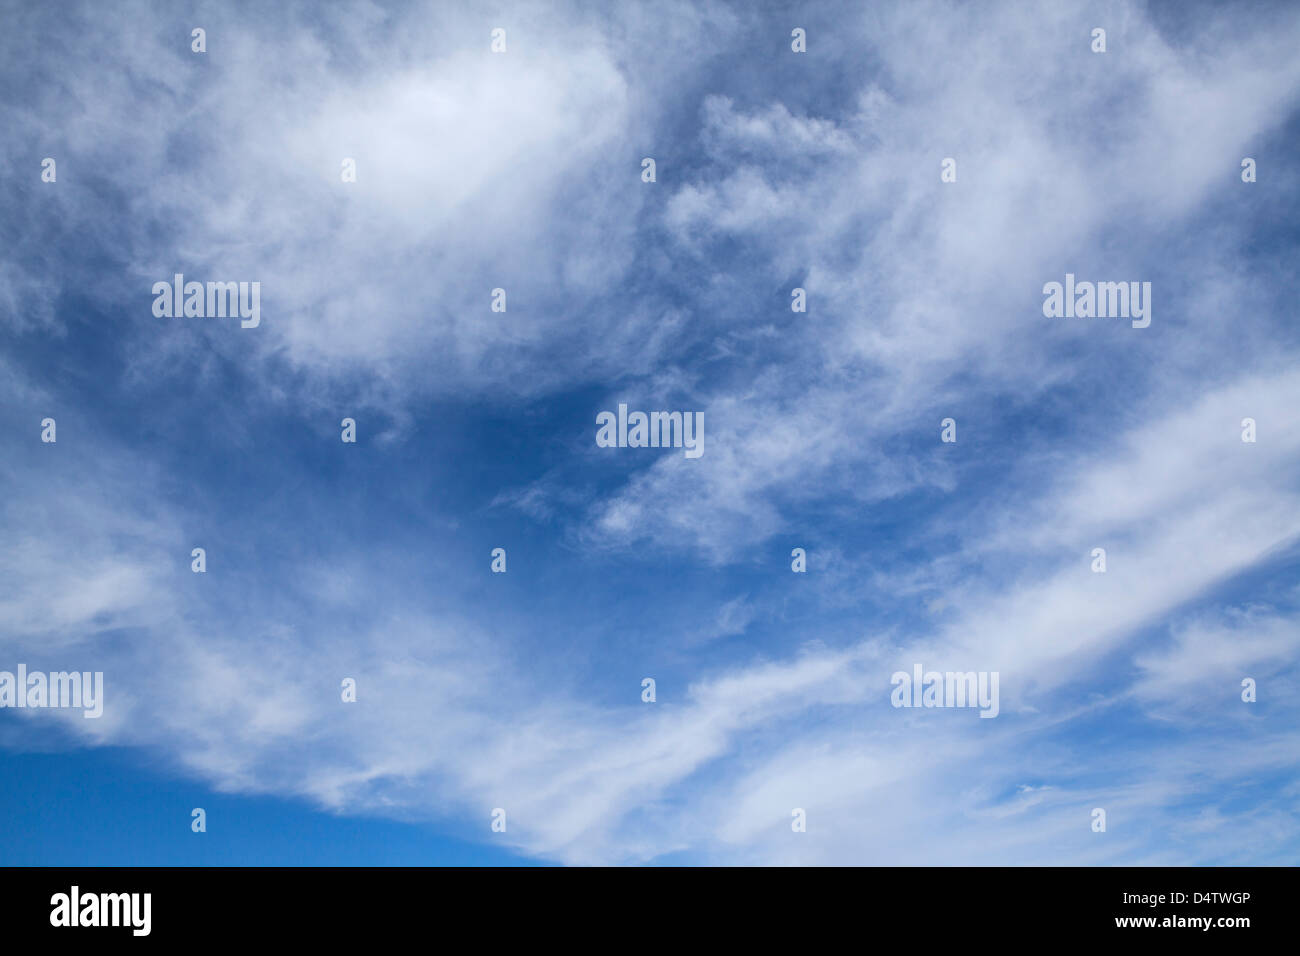 Interesting Cloud Formations against a Blue Sky, Great Backdrop Stock Photo